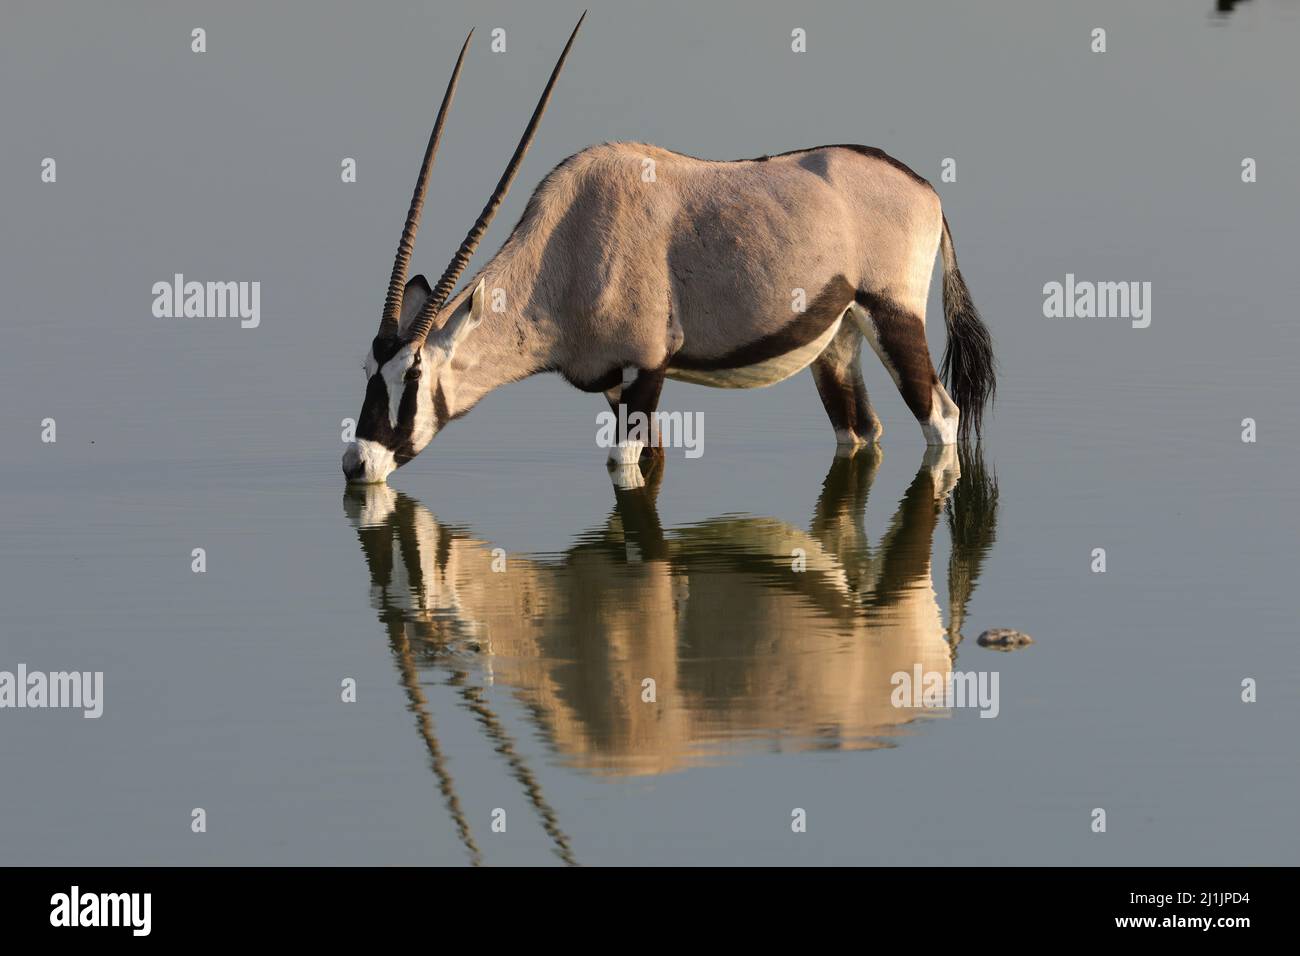 Oryx drinking is reflected in the water of a water hole Stock Photo